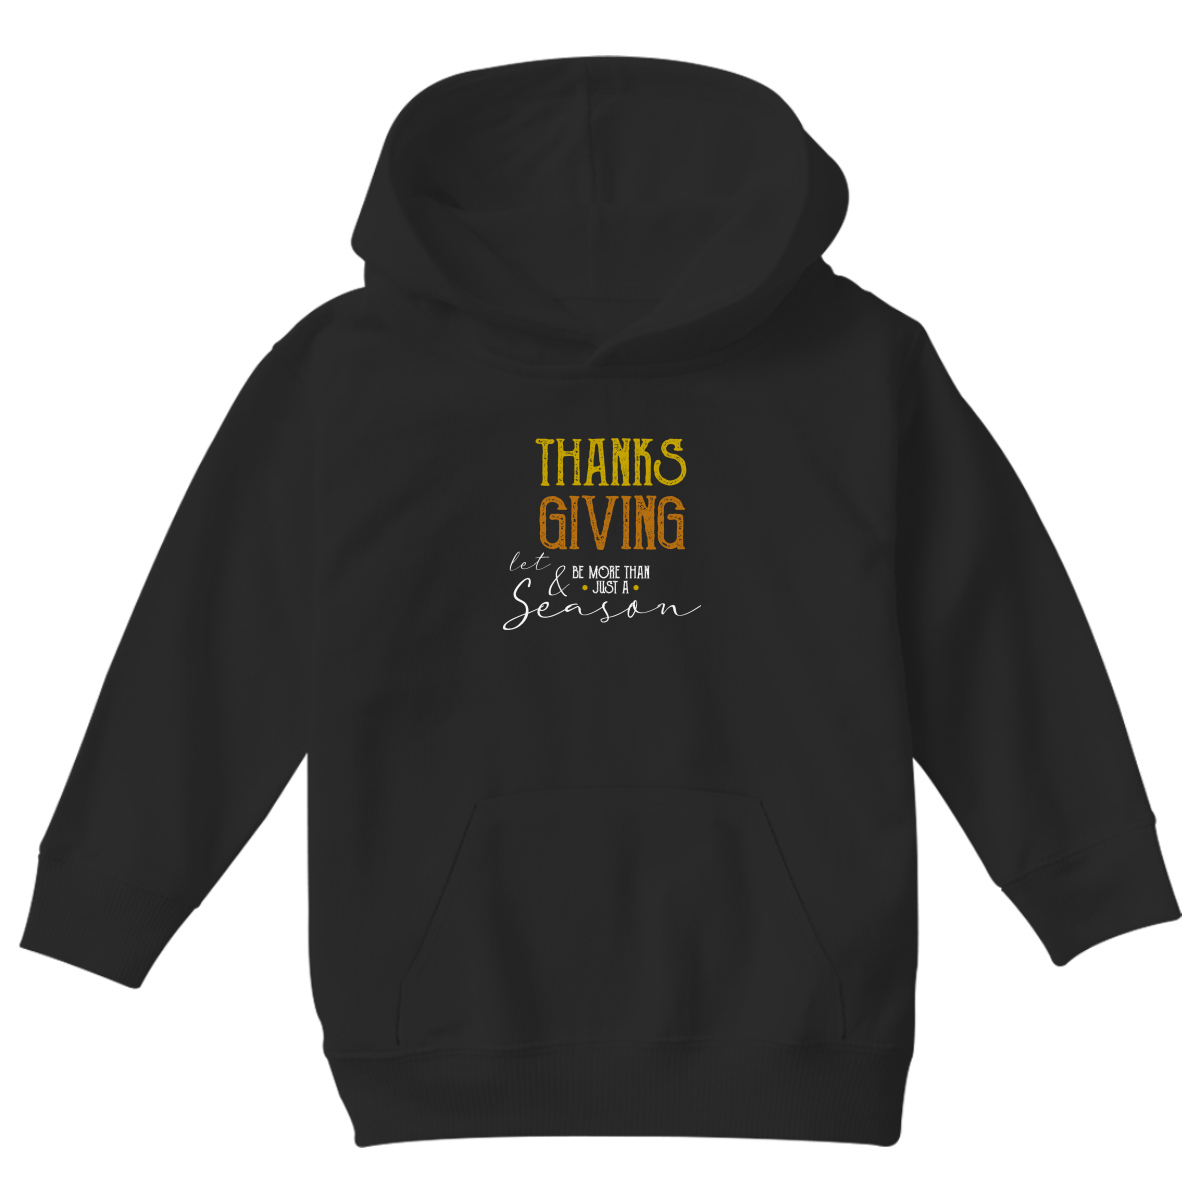 Thanks and Giving  Kids Hoodie | Black